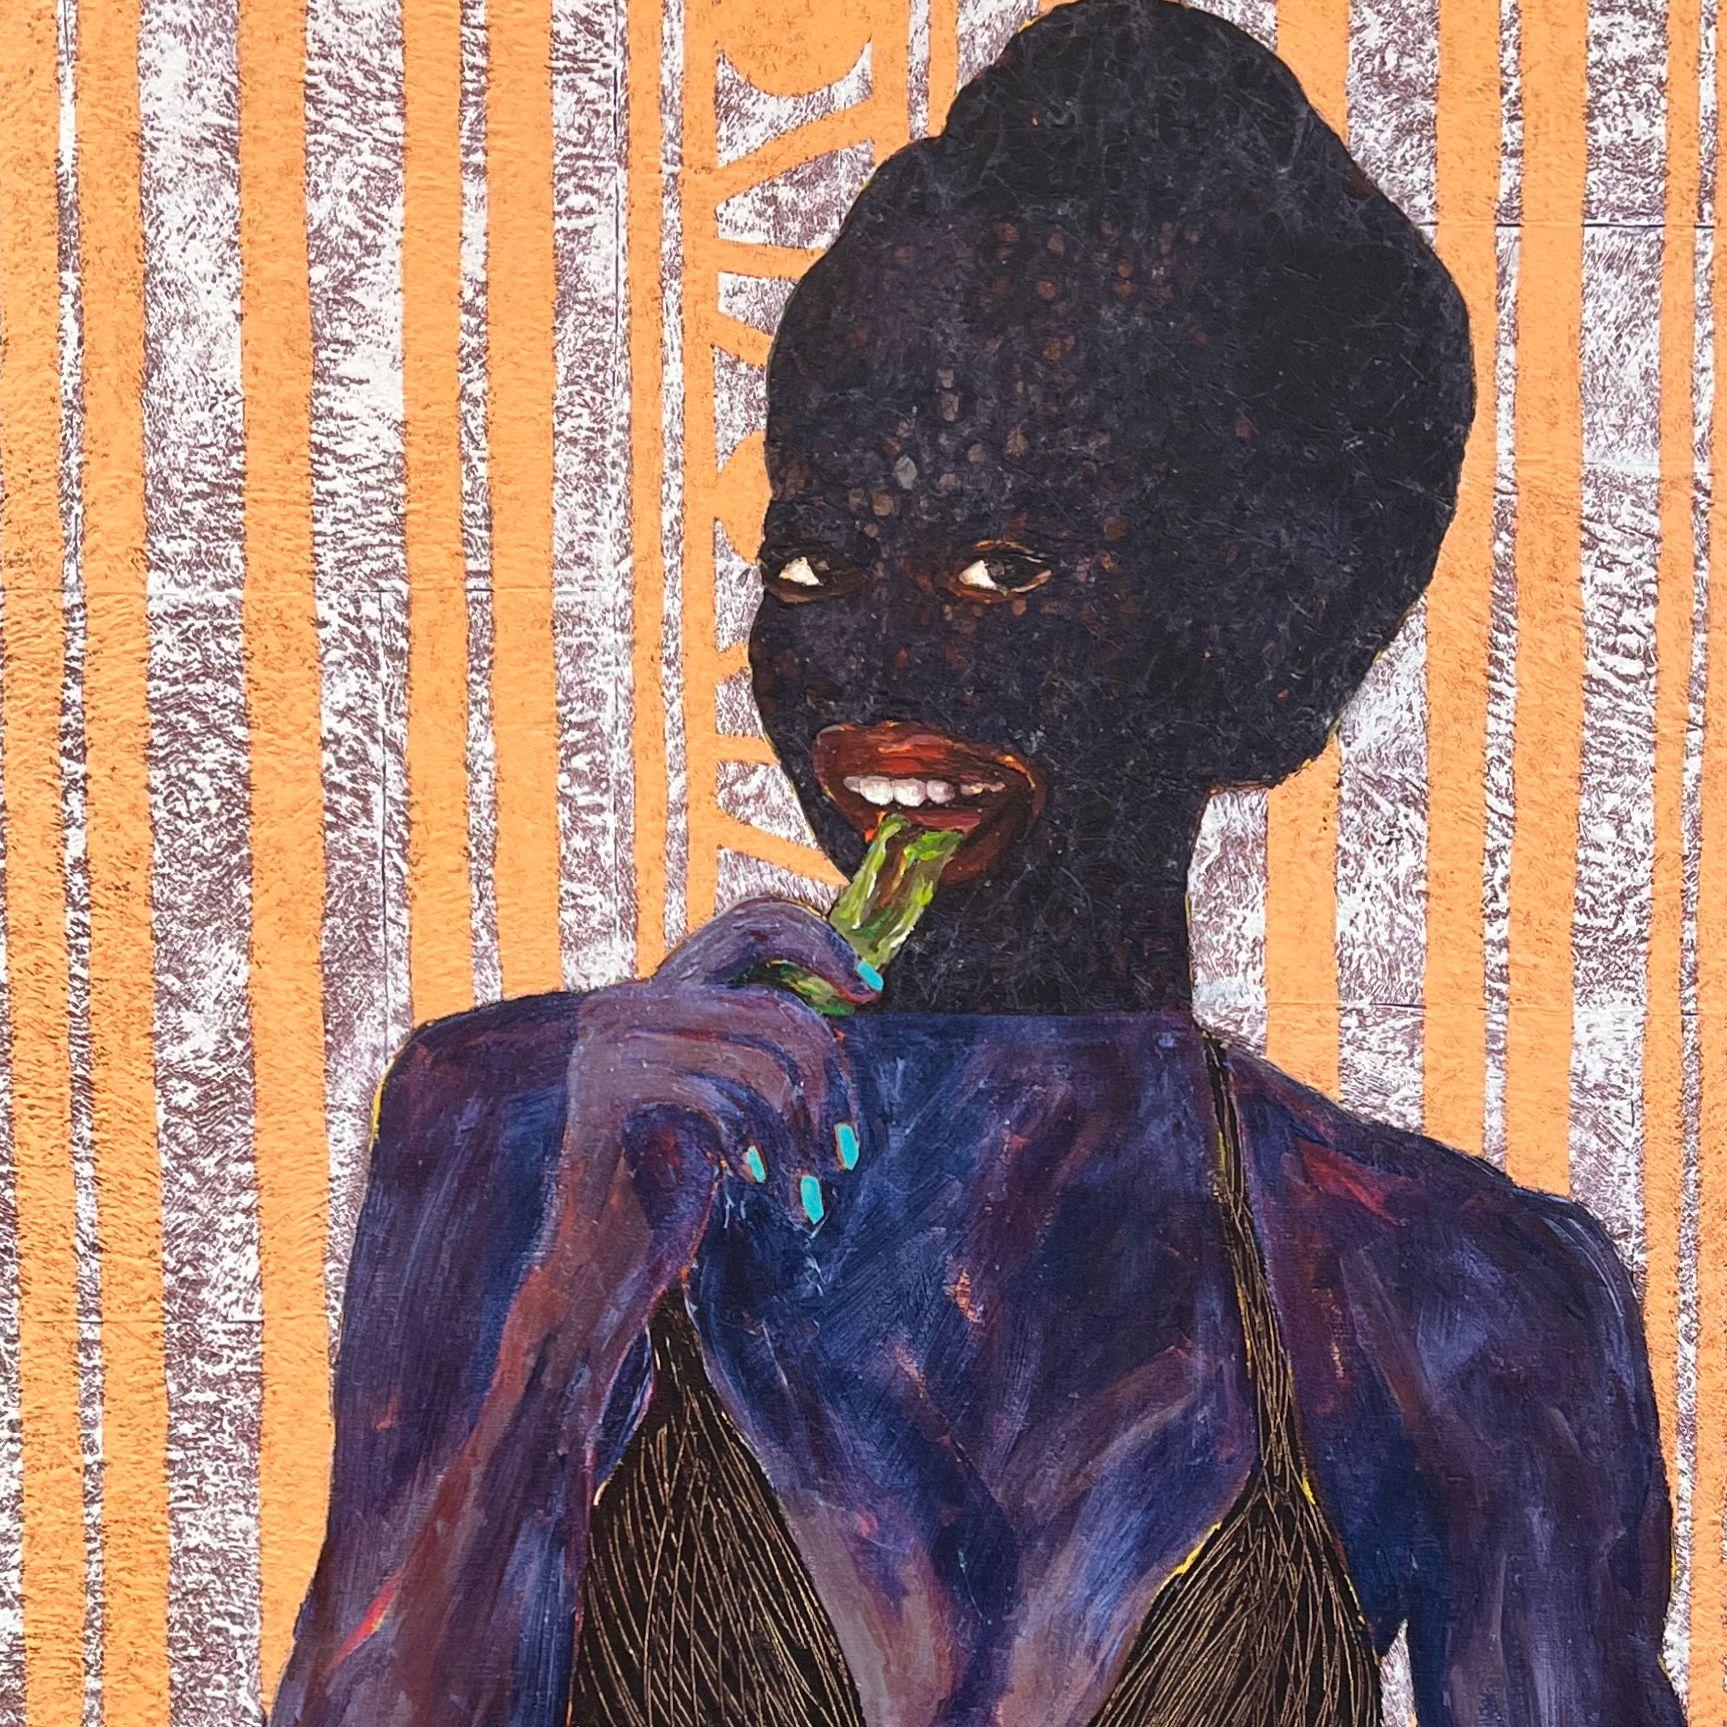 Smiling Girl Eating Salad, 2022
by Collin Sekajugo
3D-print, silicon on canvas, mounted on Dibond
Signed and numbered by the artist on the back of the artwork
Edition of 35
In mint condition (as acquired from the publisher)

Ugandan-Rwandan Collin